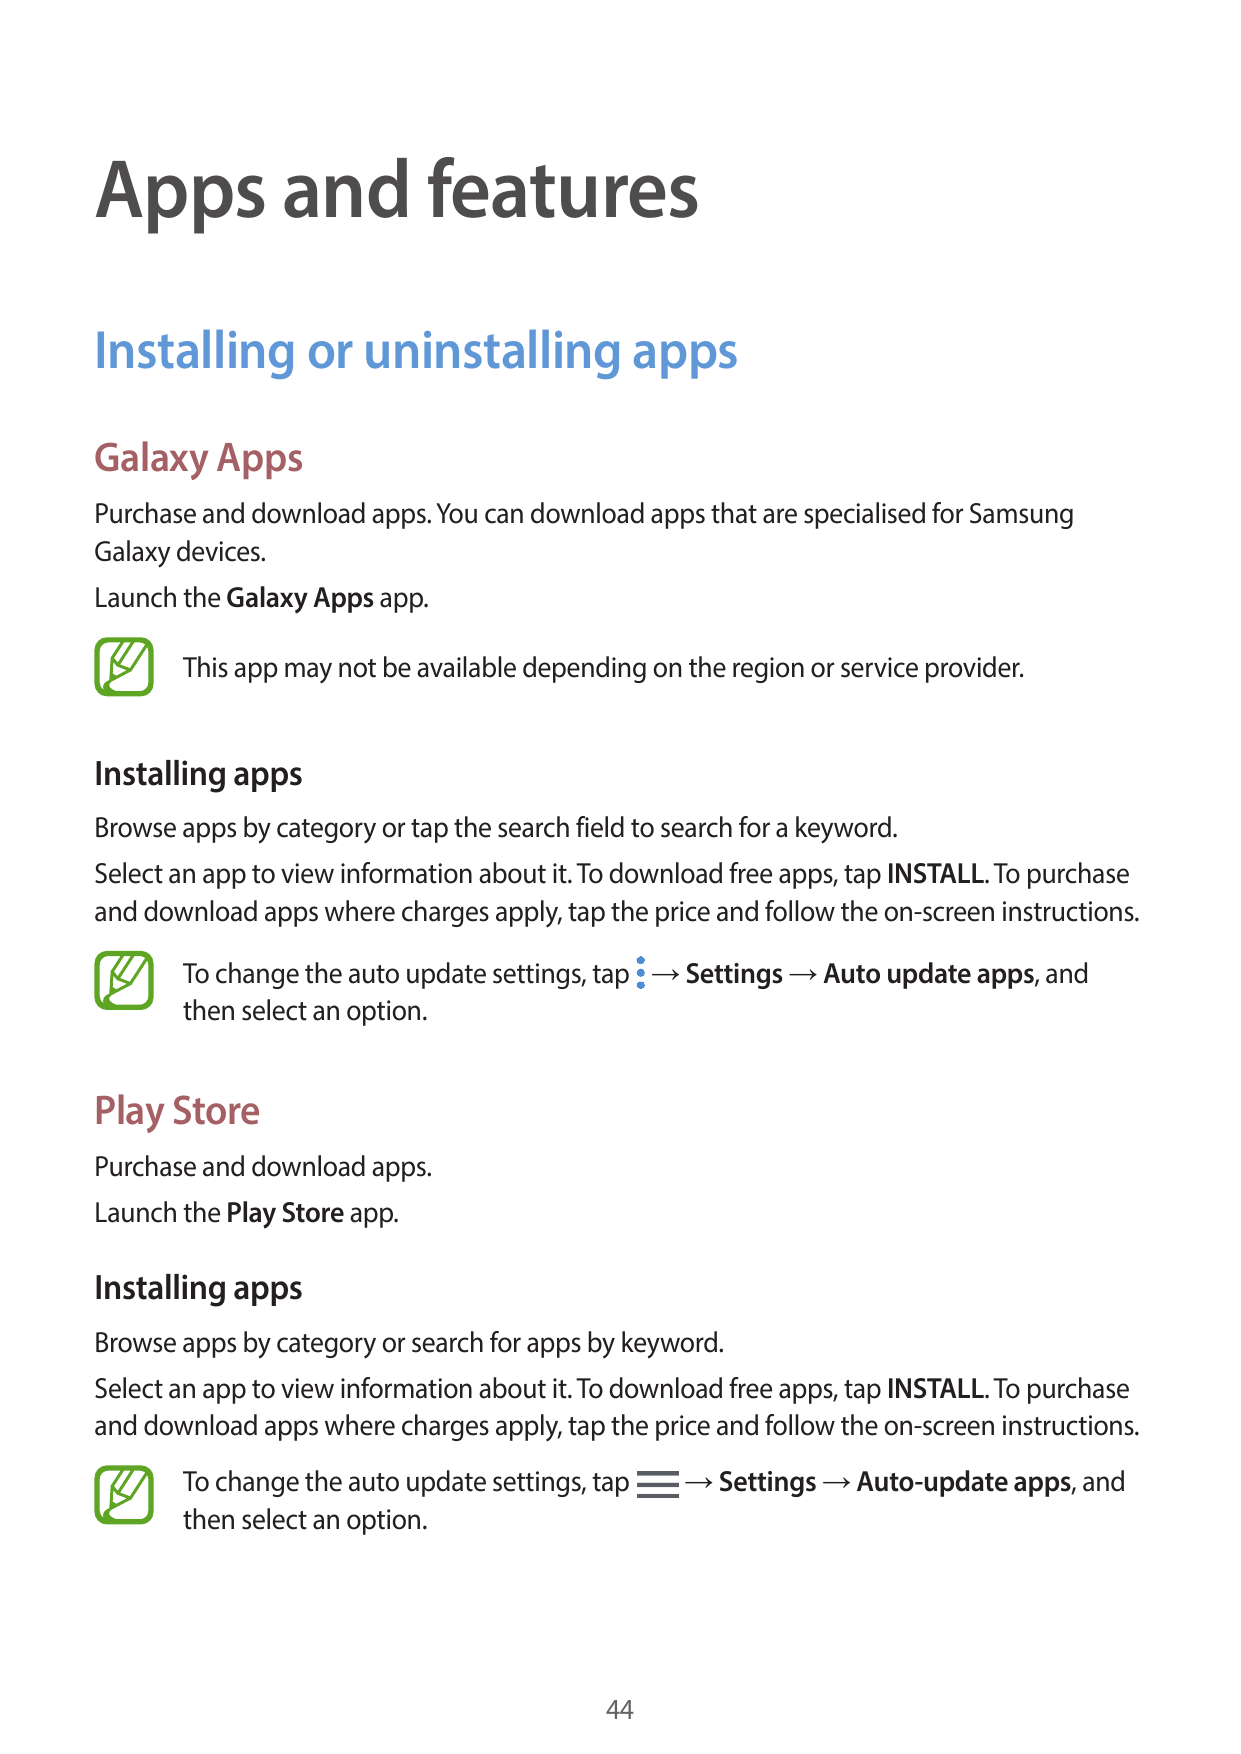 Apps and featuresInstalling or uninstalling appsGalaxy AppsPurchase and download apps. You can download apps that are specialise